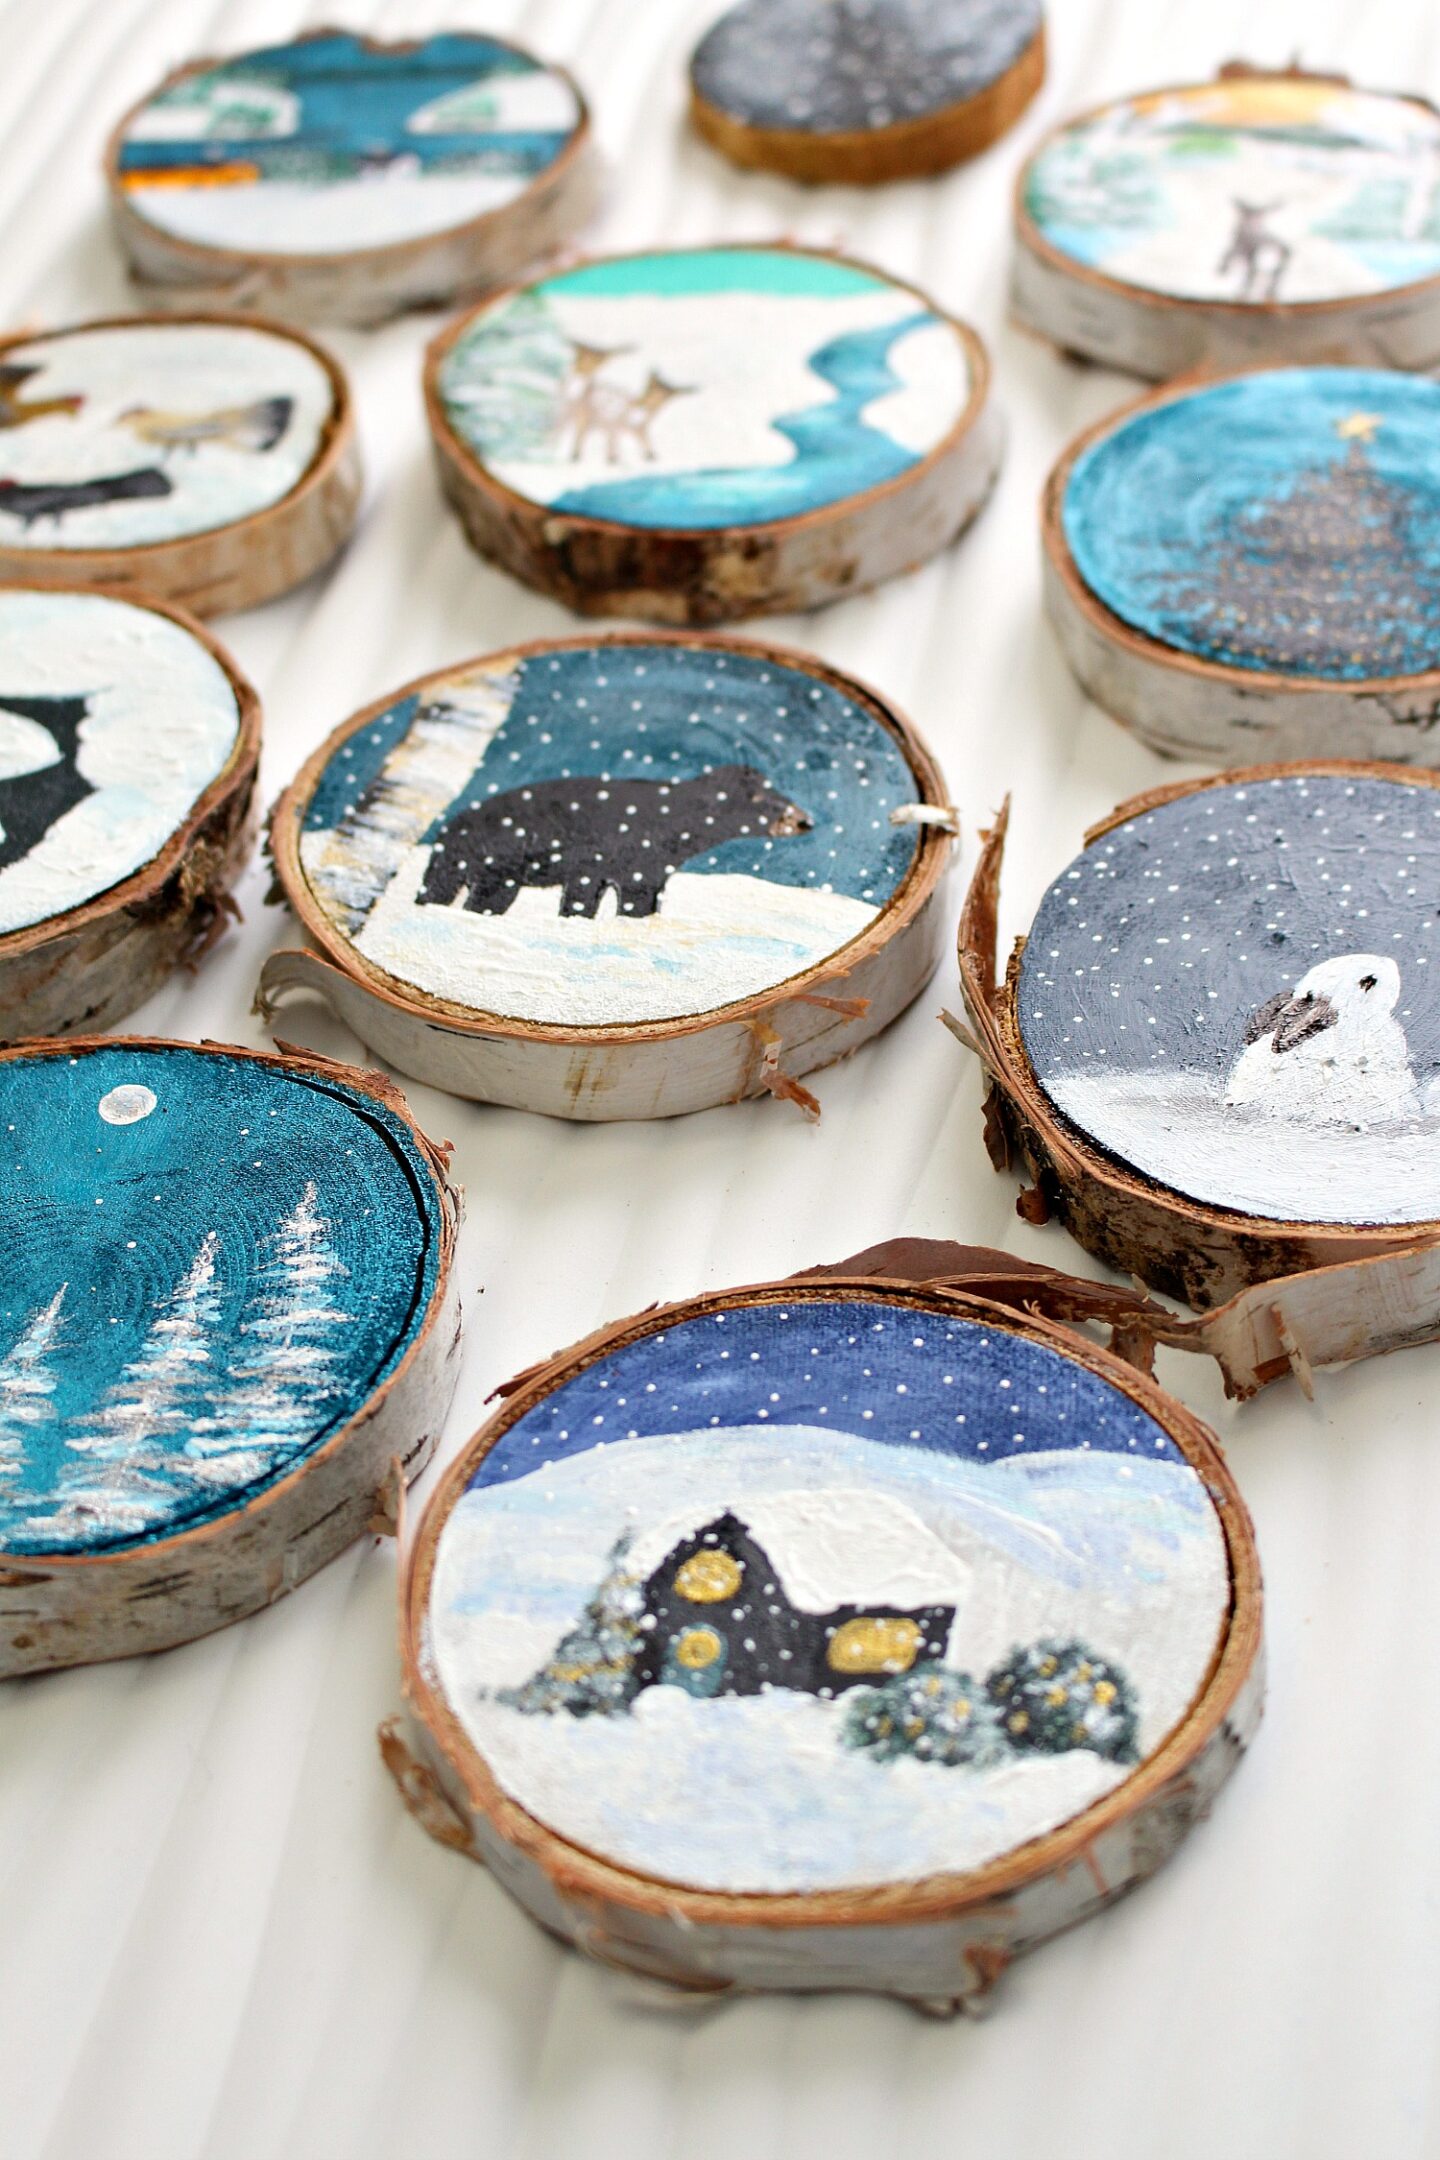 DIY Painted Birch Slice Ornaments (Inspired by Maud Lewis)